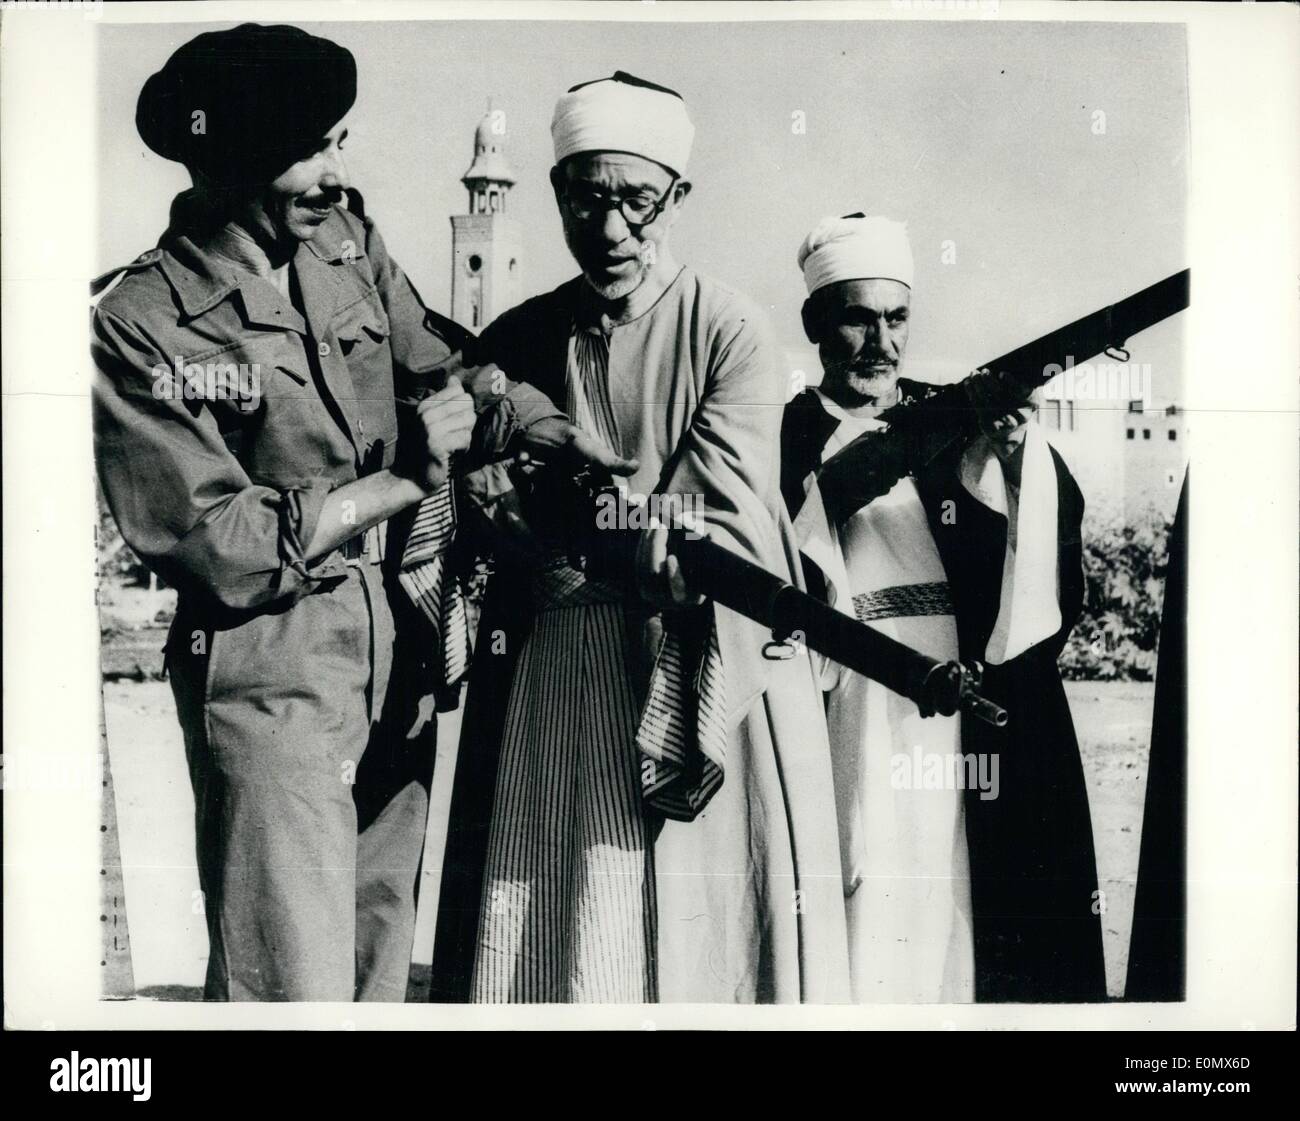 Aug. 08, 1956 - Military Training at Al Azhar university in Egypt. Military training has begun at the Al Azhar University in Egypt - and here is Sheikh Abdel Rahman Tag, Rector of the Azhar University, receiving instruction in the use of a rifle, from one of the officers in charge. Stock Photo